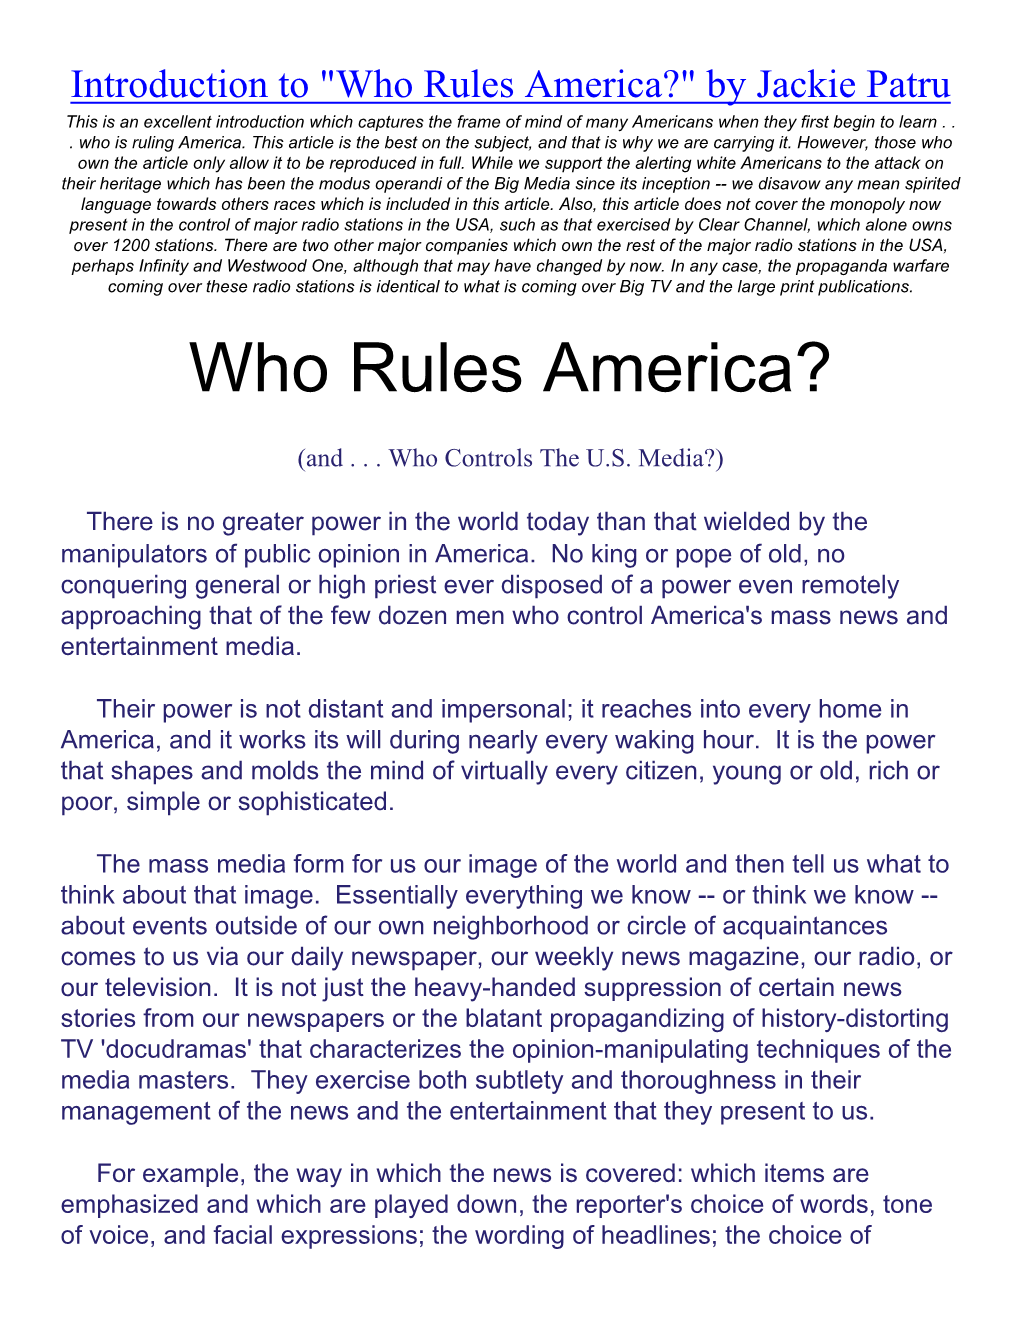 Who Rules America?" by Jackie Patru This Is an Excellent Introduction Which Captures the Frame of Mind of Many Americans When They First Begin to Learn